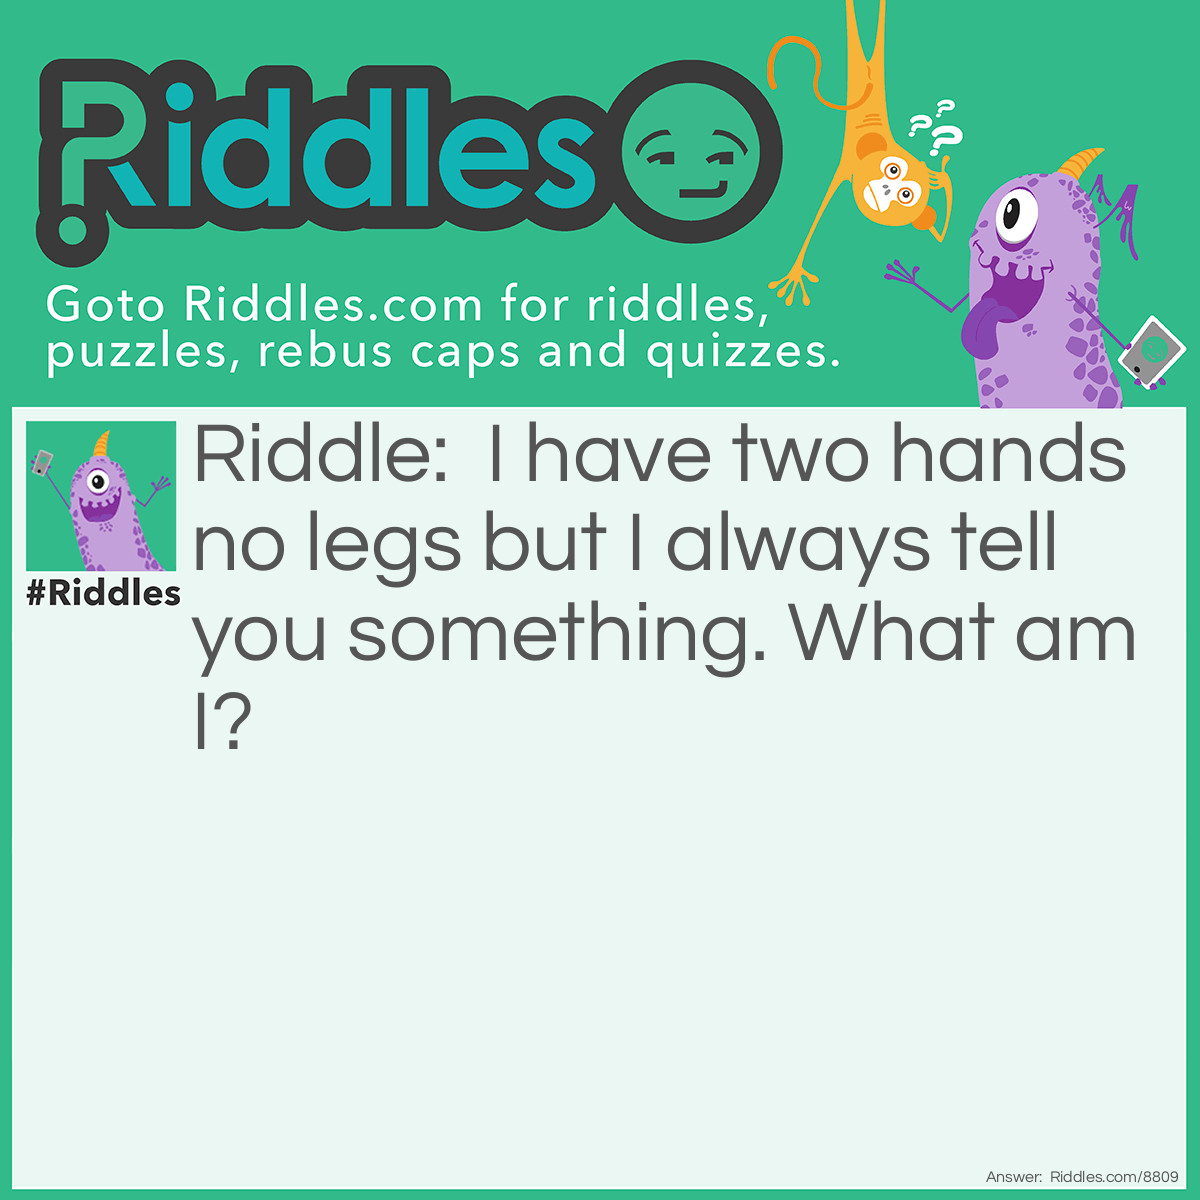 Riddle: I have two hands no legs but I always tell you something. What am I? Answer: A clock.